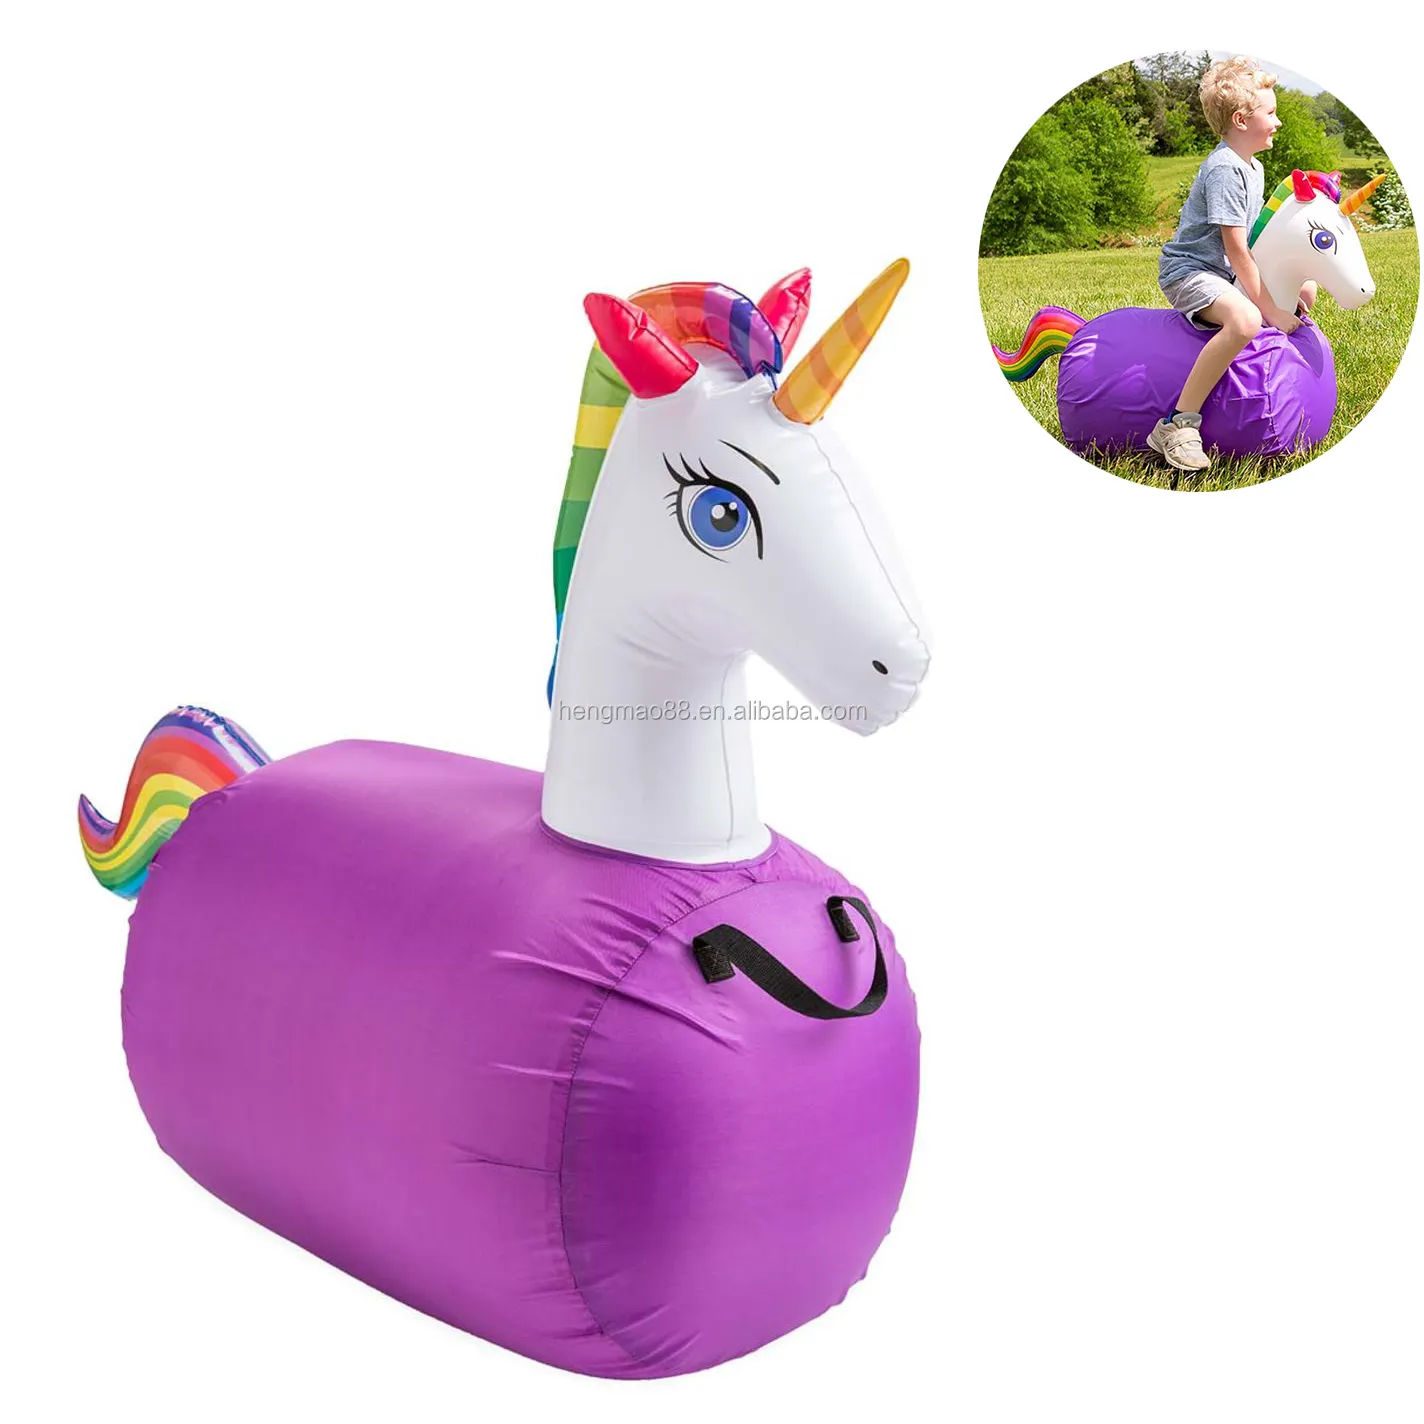 <span class=keywords><strong>Inflable</strong></span> tolva animales unicornio <span class=keywords><strong>carrera</strong></span> con cubierta <span class=keywords><strong>de</strong></span> los niños paseo en caballo <span class=keywords><strong>de</strong></span> juguete